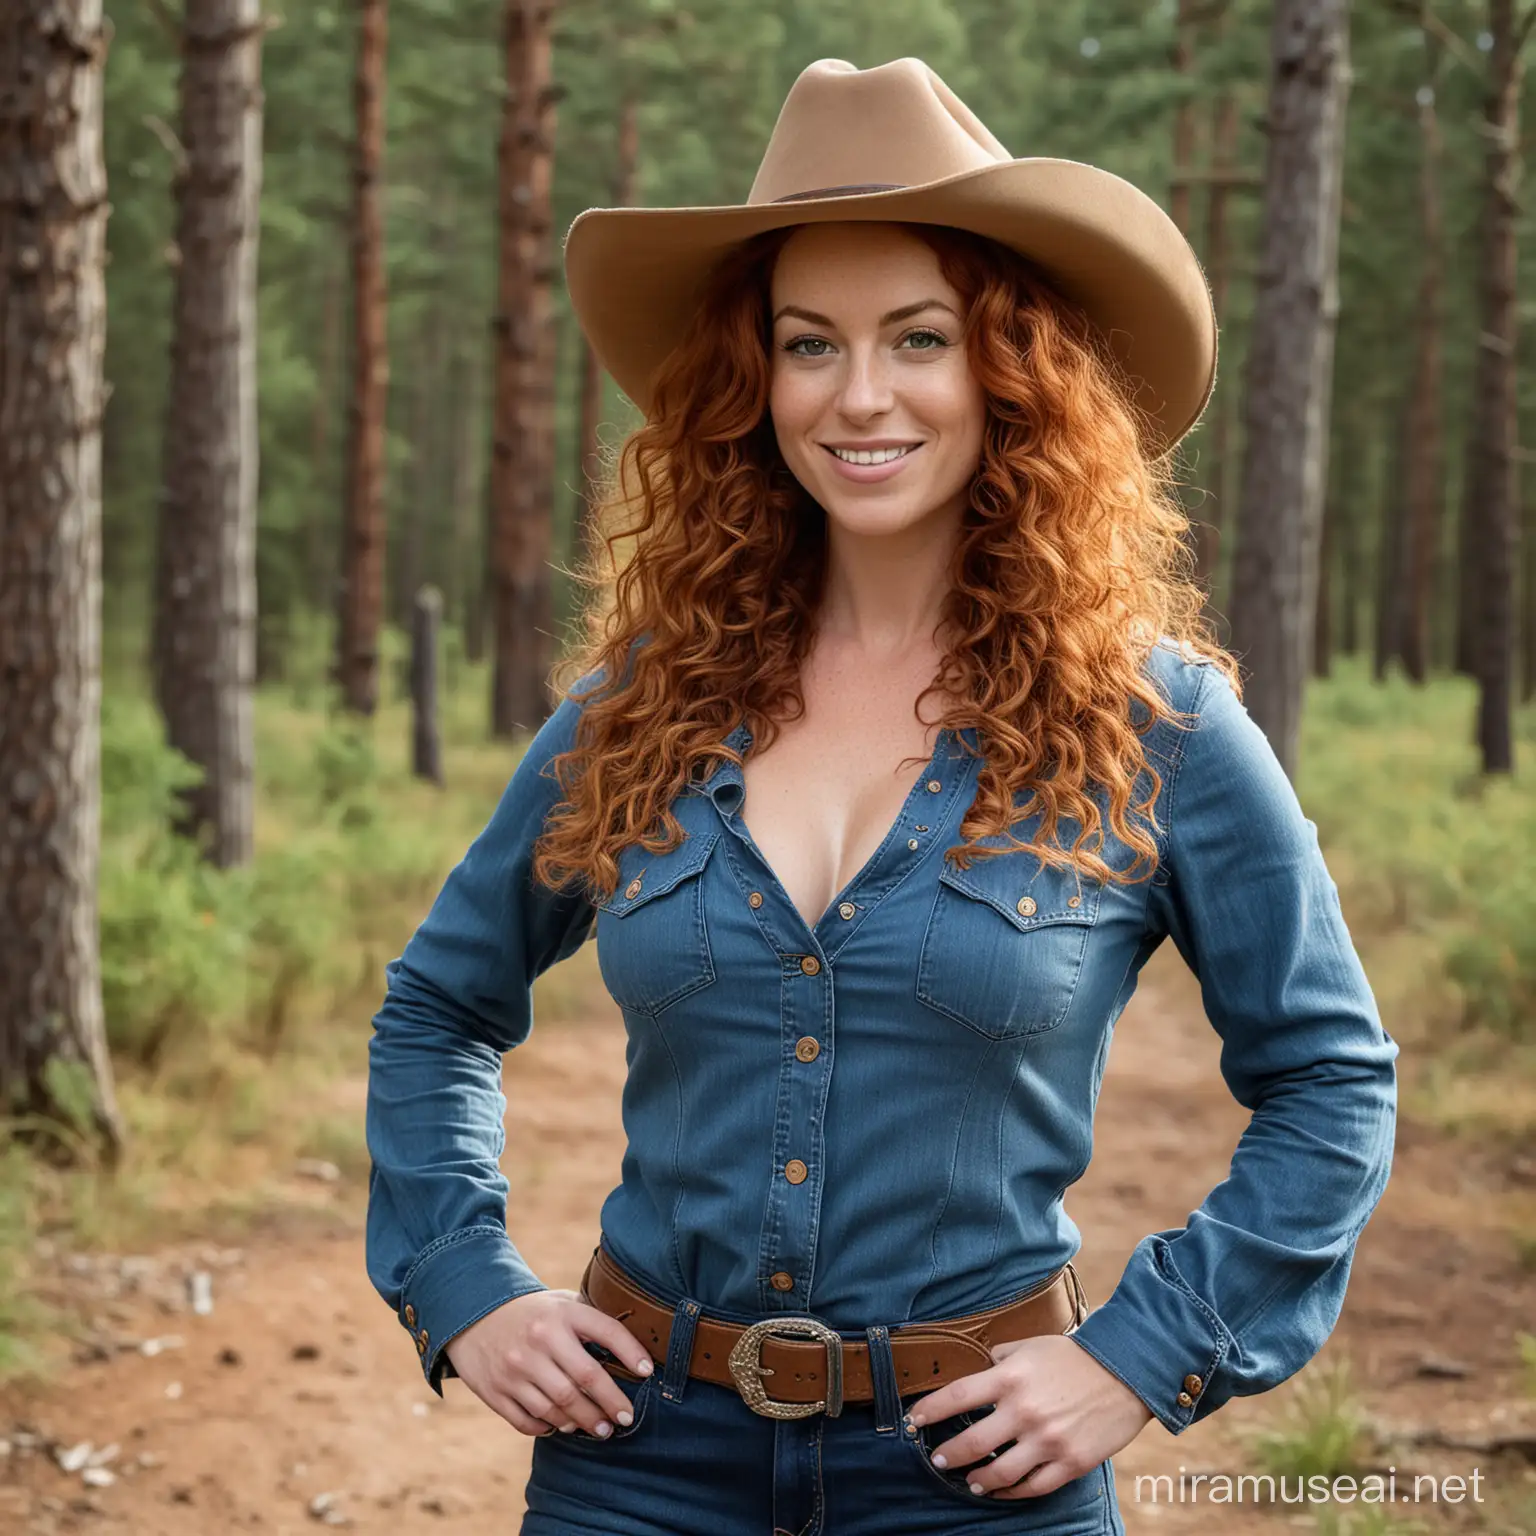 37 year old irish woman, fair skin, freckles, huge breasts, long red curly hair, hourglass figure, facing the viewer, hands on hips, smiling happily, dressed in western style with cowboy hat and denim buttoned shirt, lots of breast cleavage, western pine forest and trail in the background